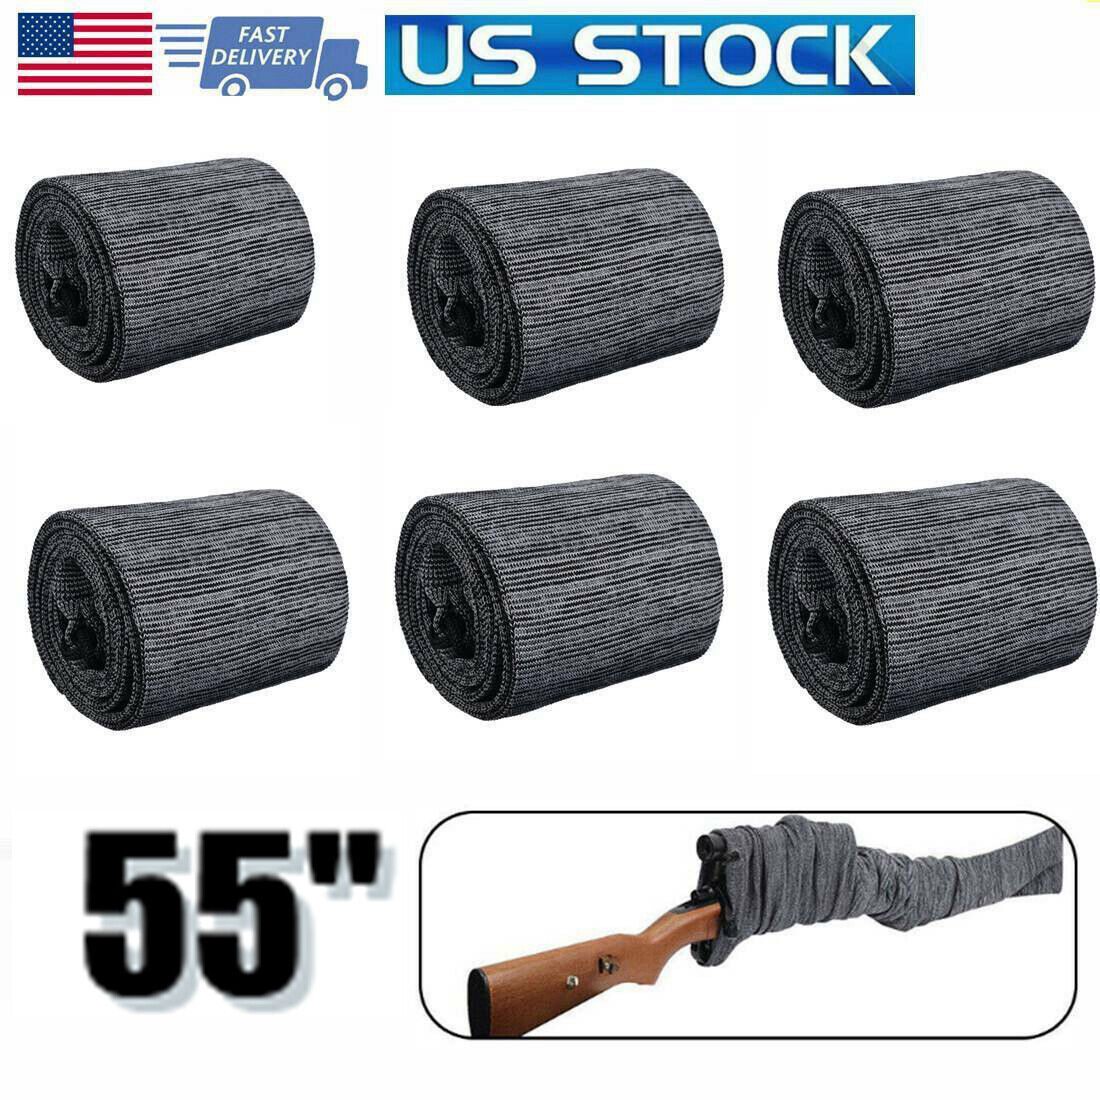 6 Pcs Silicone Treated Cover Gun Sock Protection Storge Sleeve Up To 55" Gray US